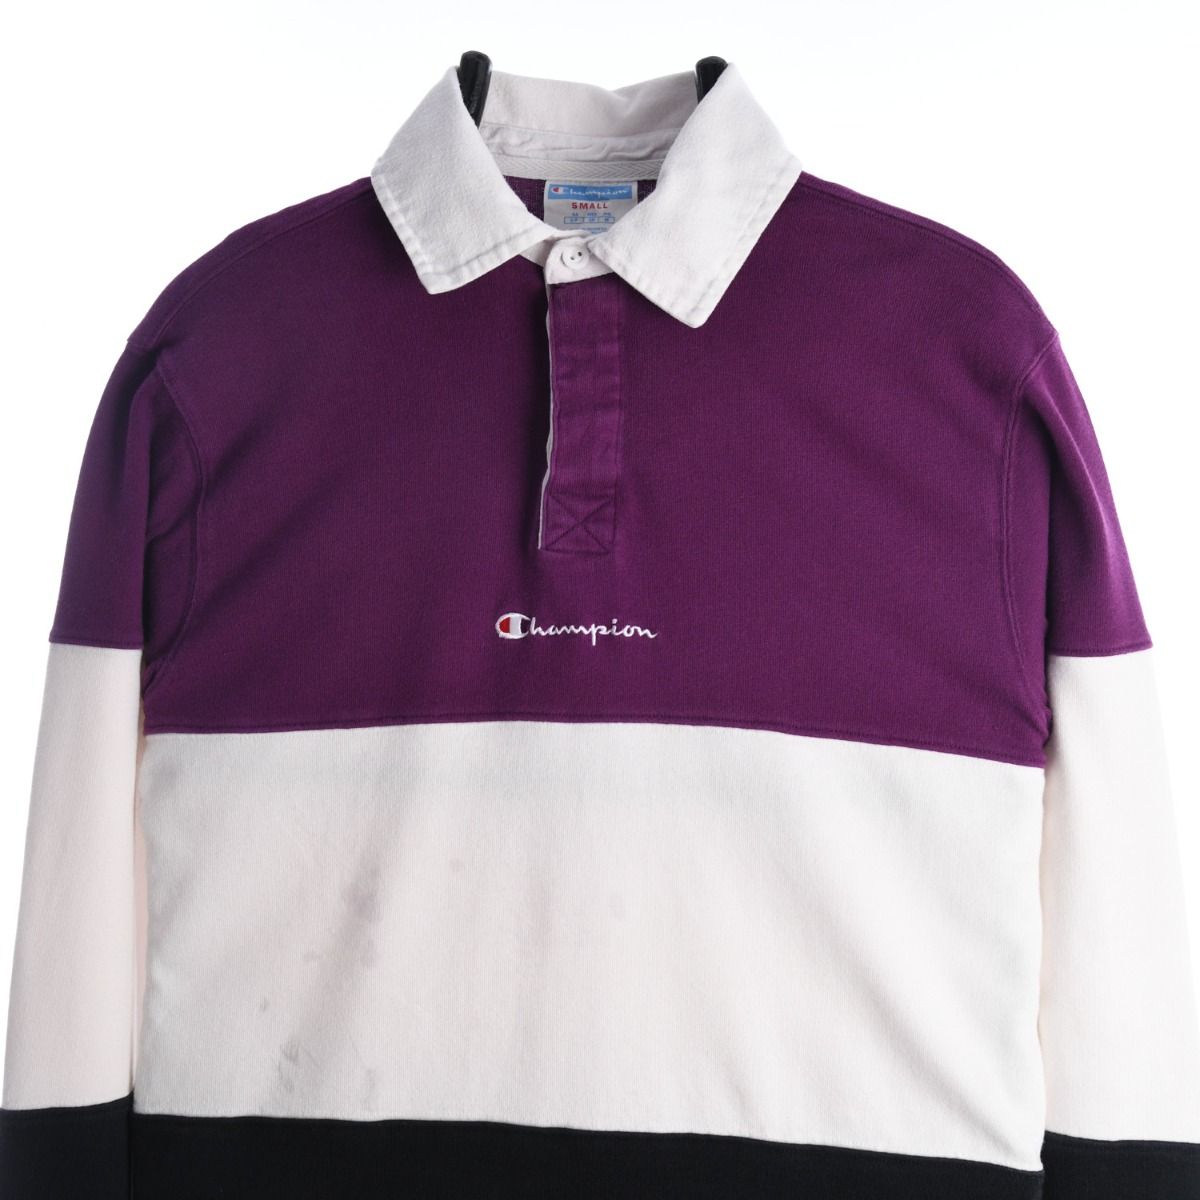 Champion 1990s Rugby Shirt